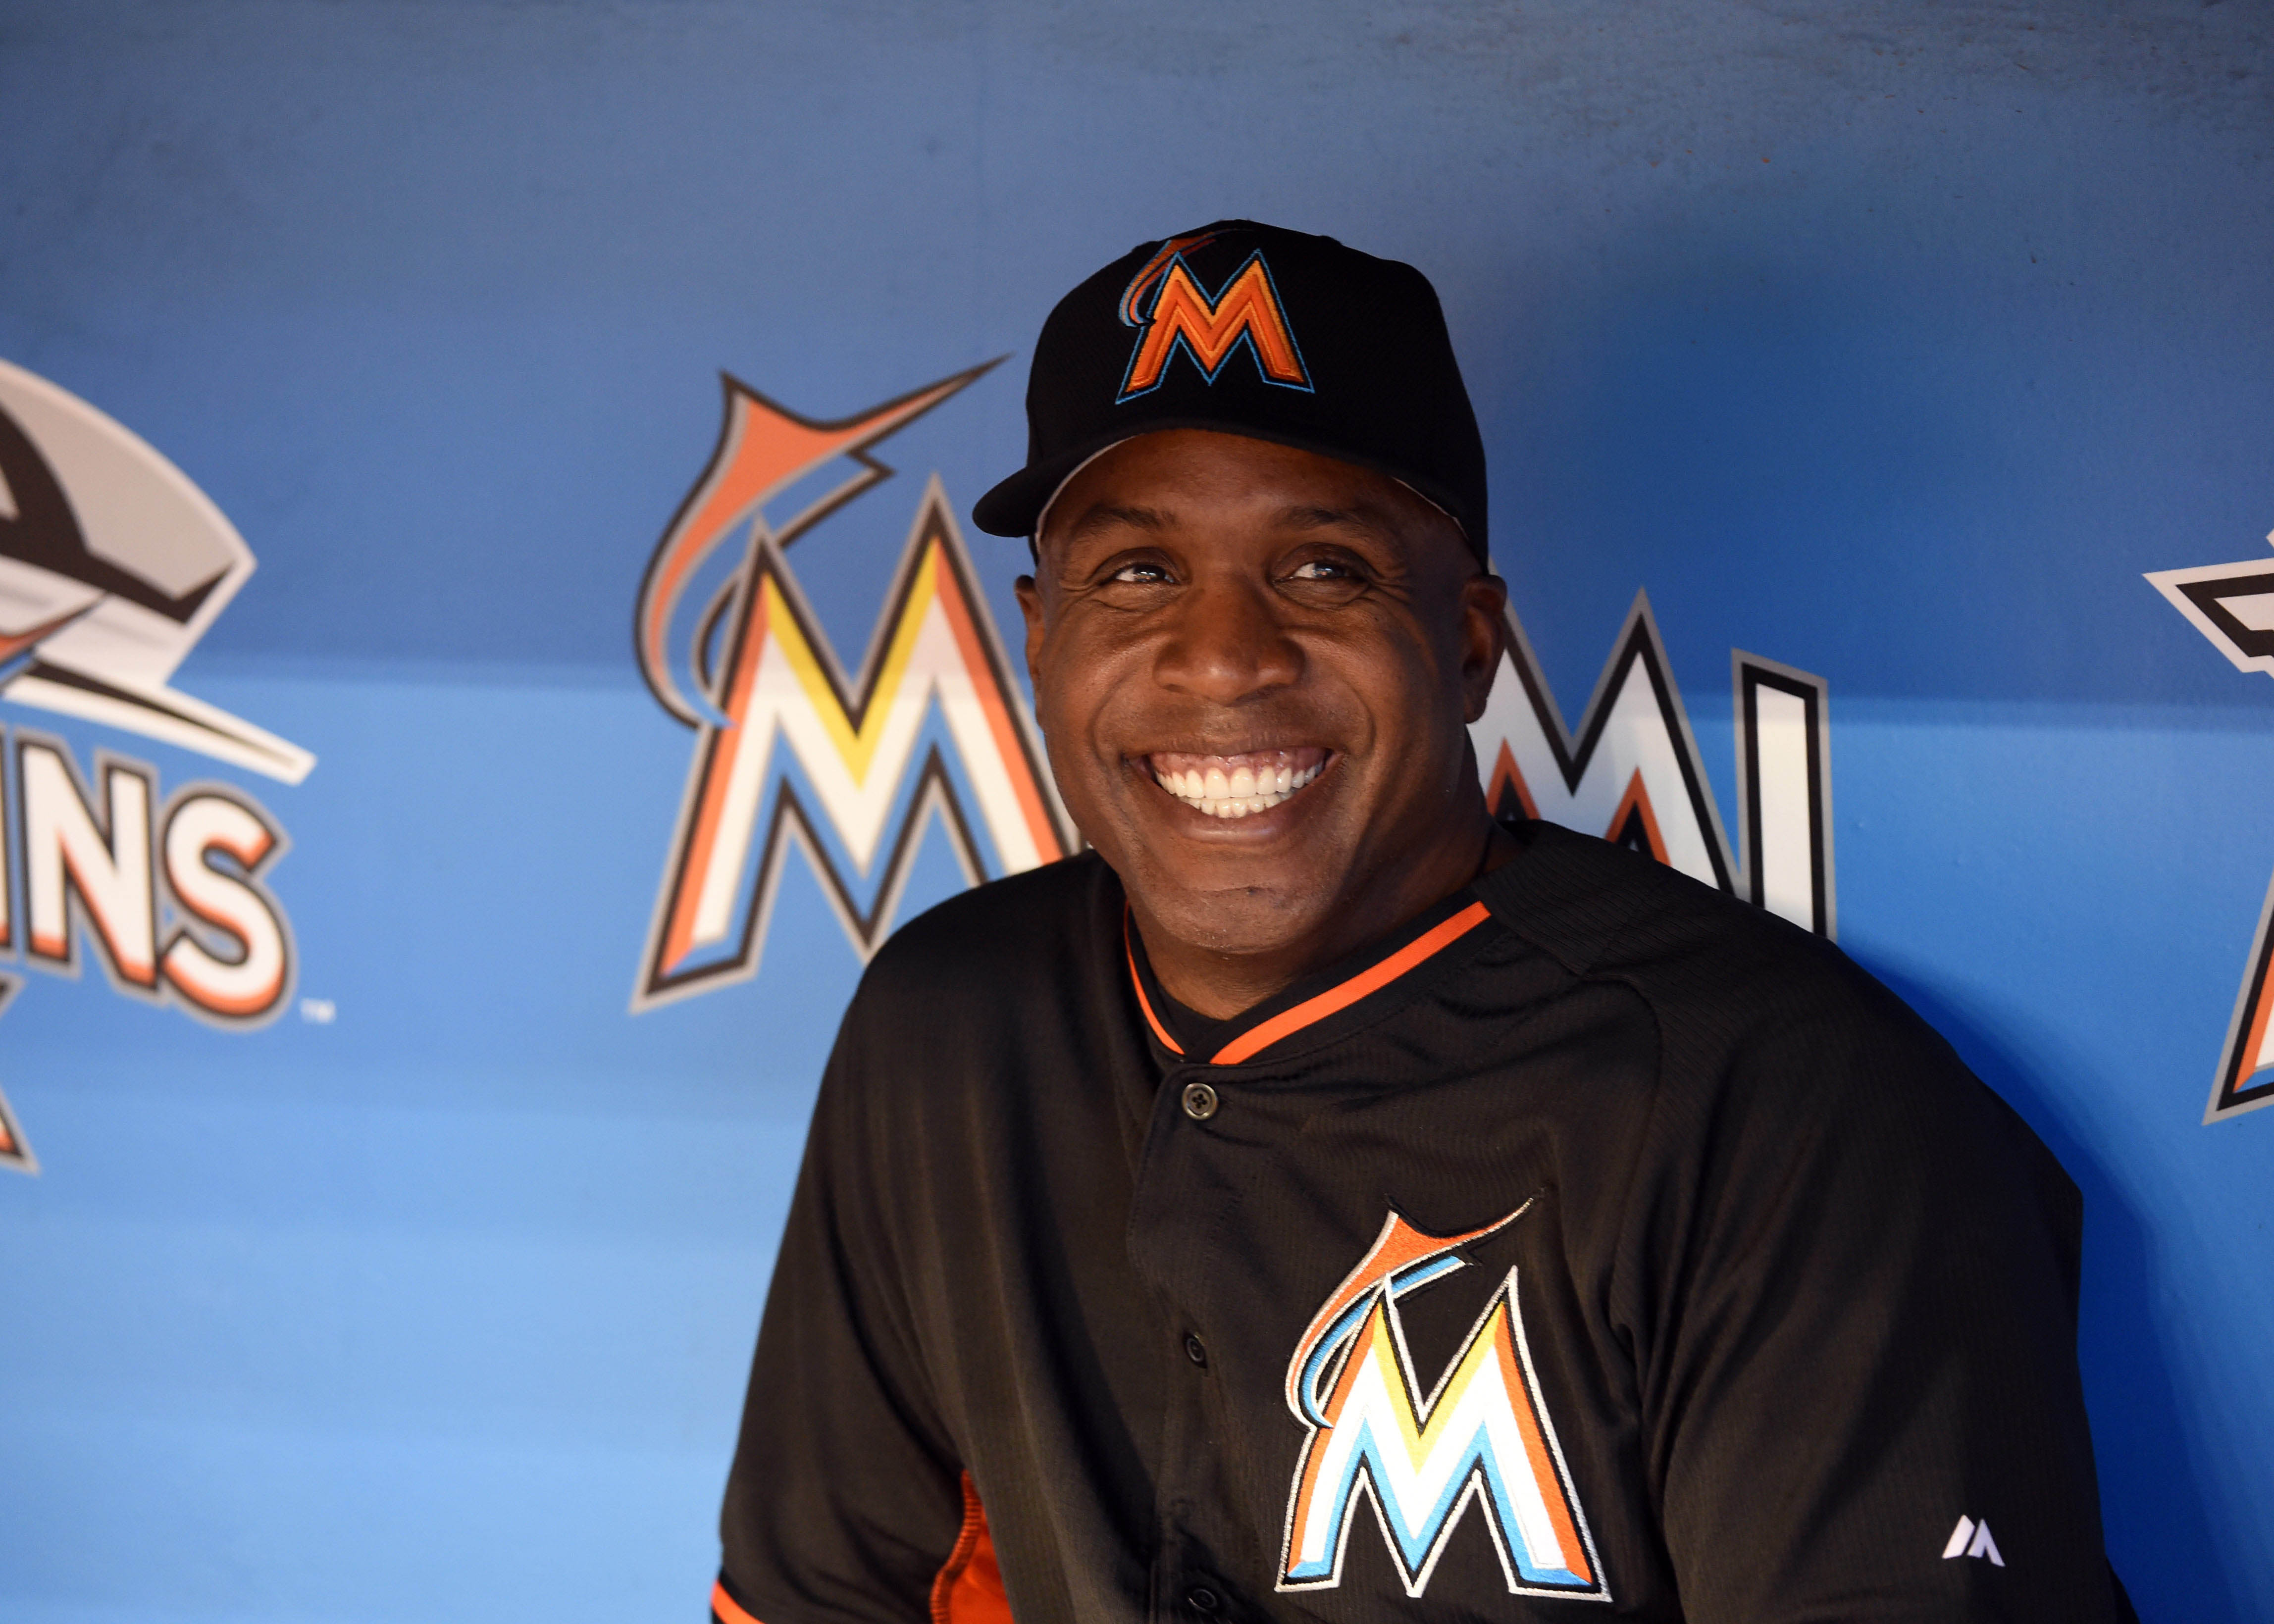 Barry Bonds on return to San Francisco: 'That's my cove